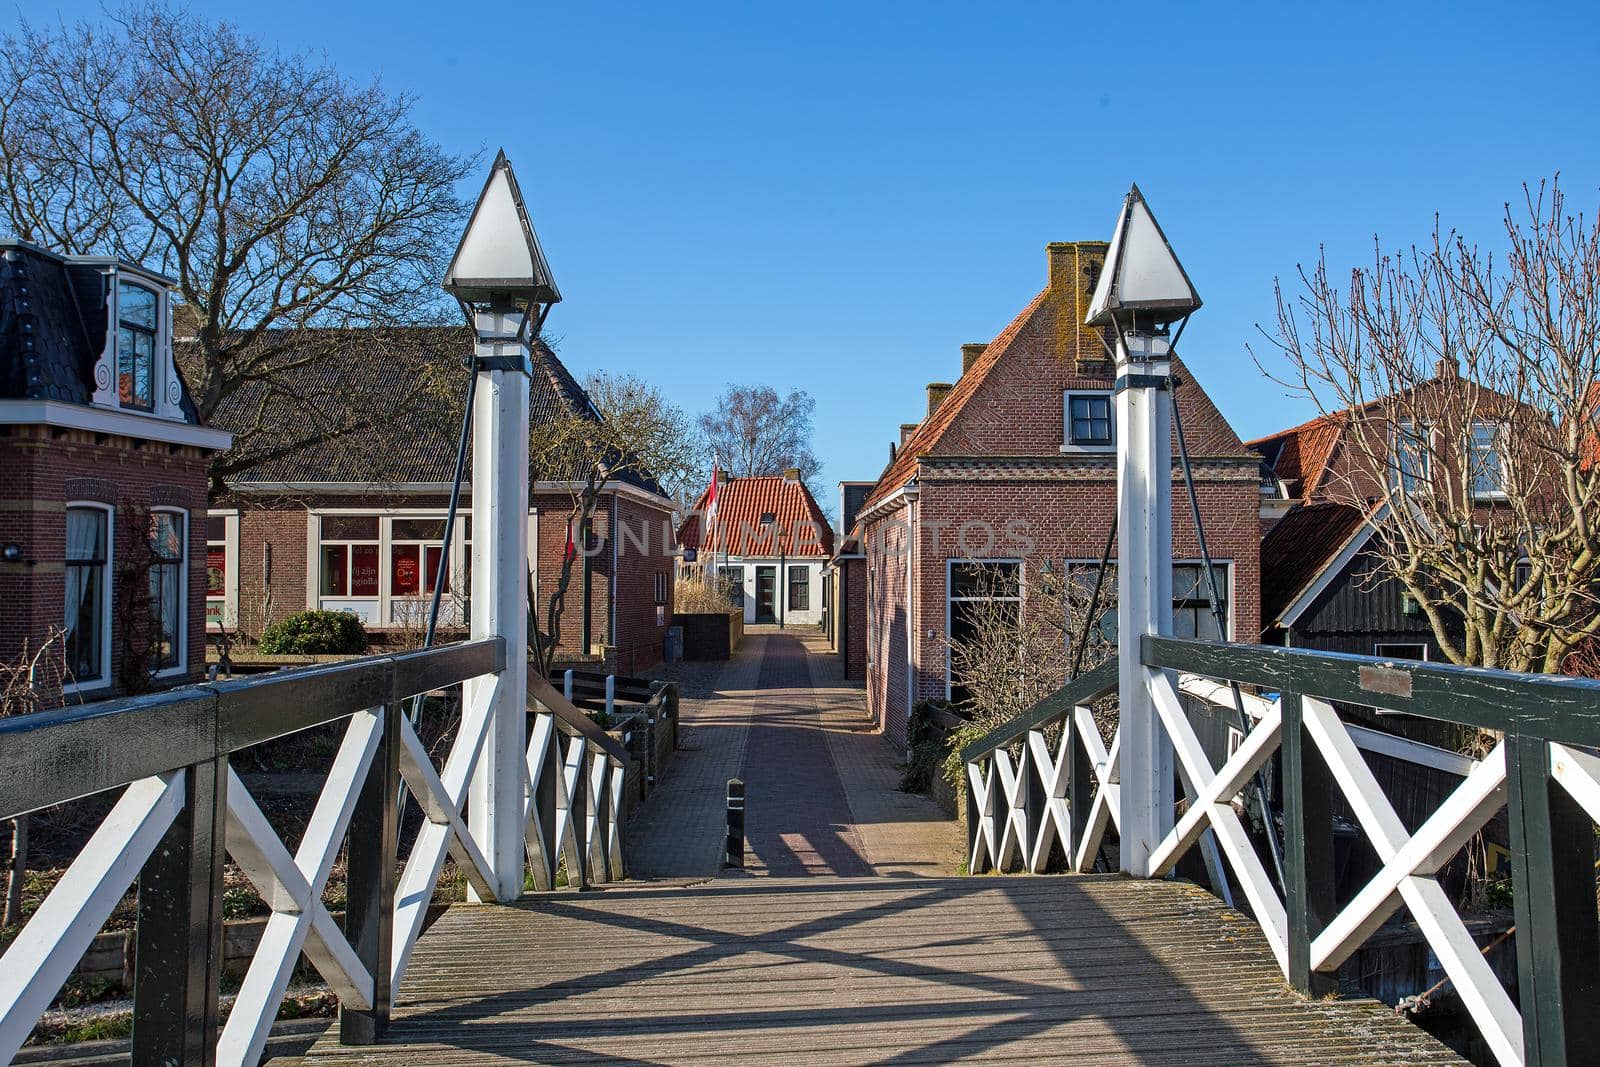 Medieval bridge and houses in the city Hindeloopen in the Netherlands